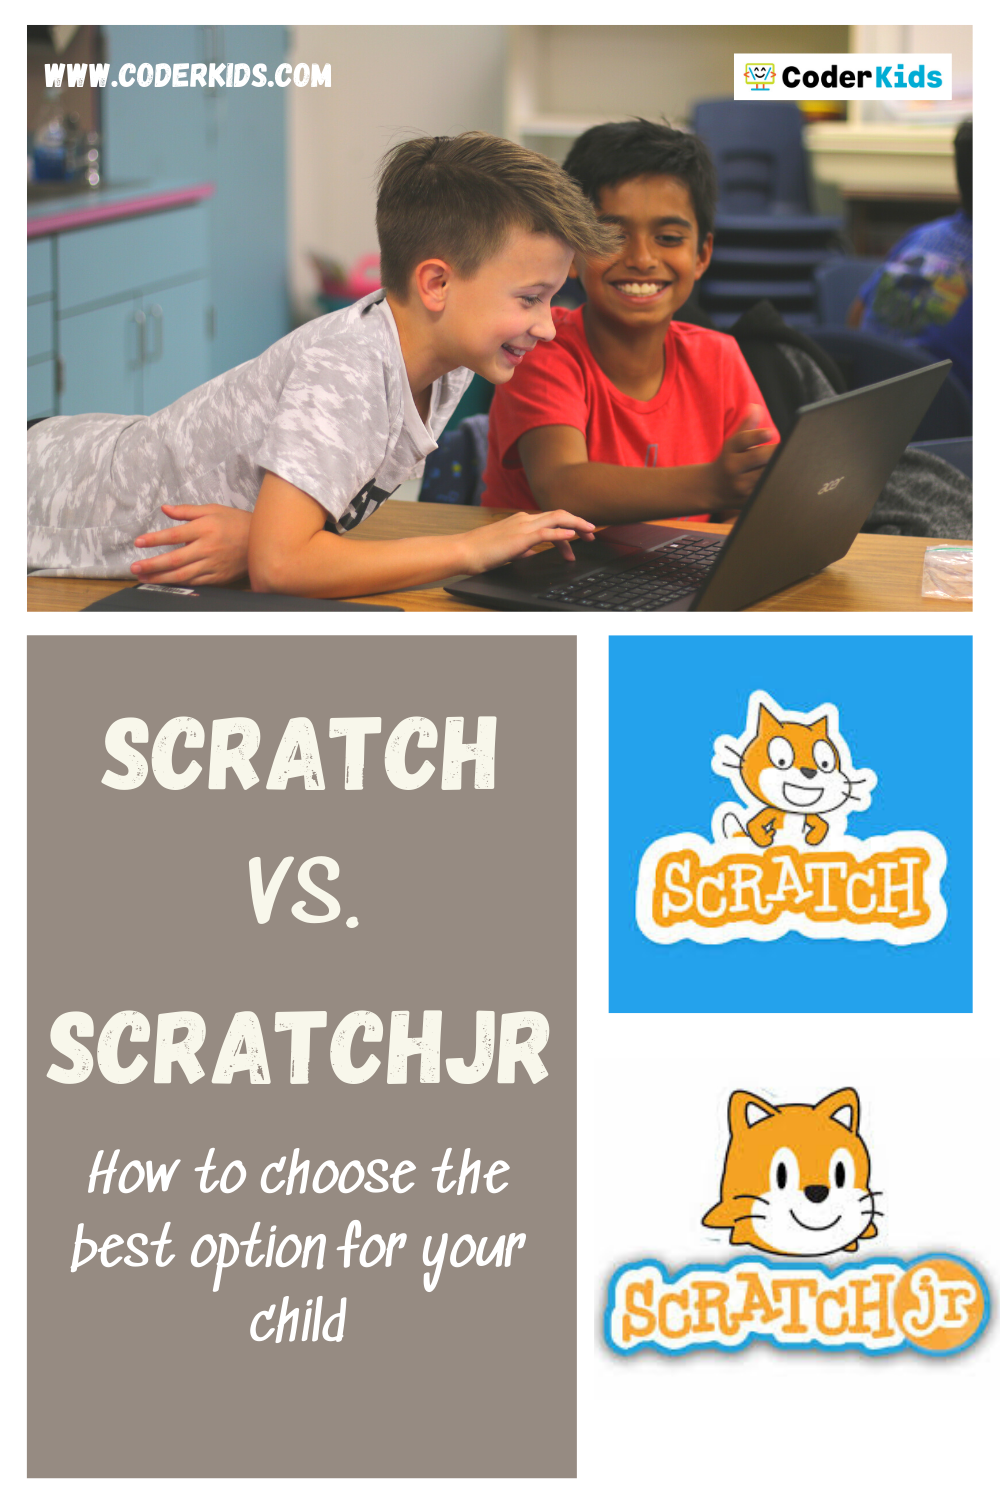 What is the difference between scratch and ScratchJr?